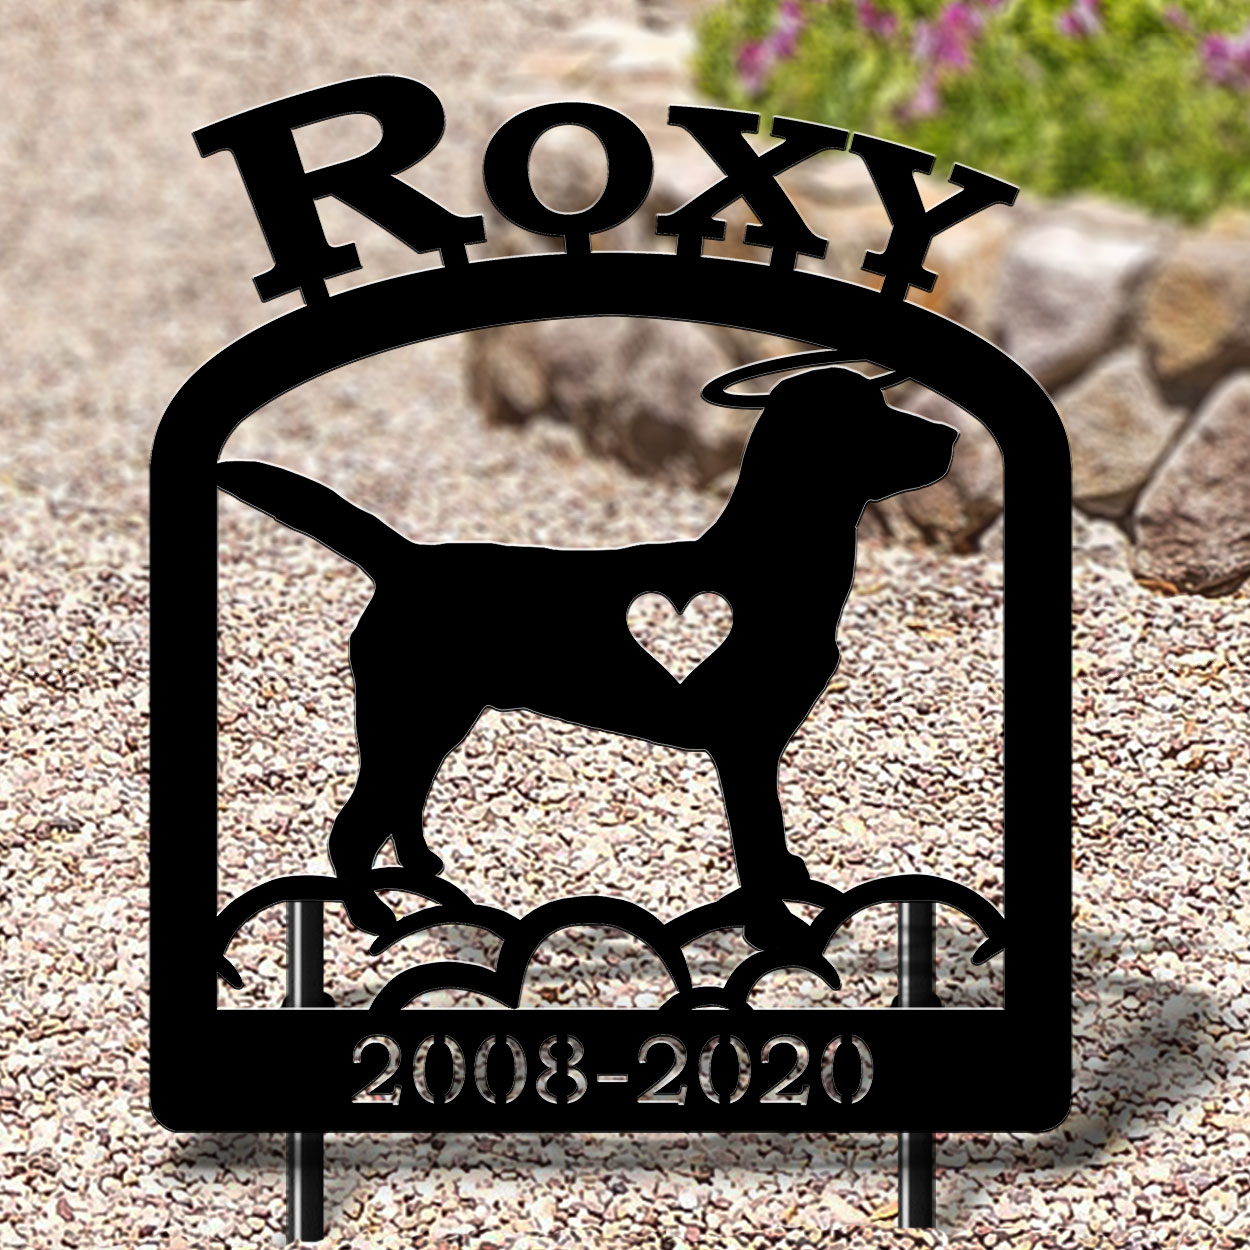 601713 - 16in x 19in Labrador Retriever Personalized Upright Outdoor Metal Dog Memorial in Black or Rust